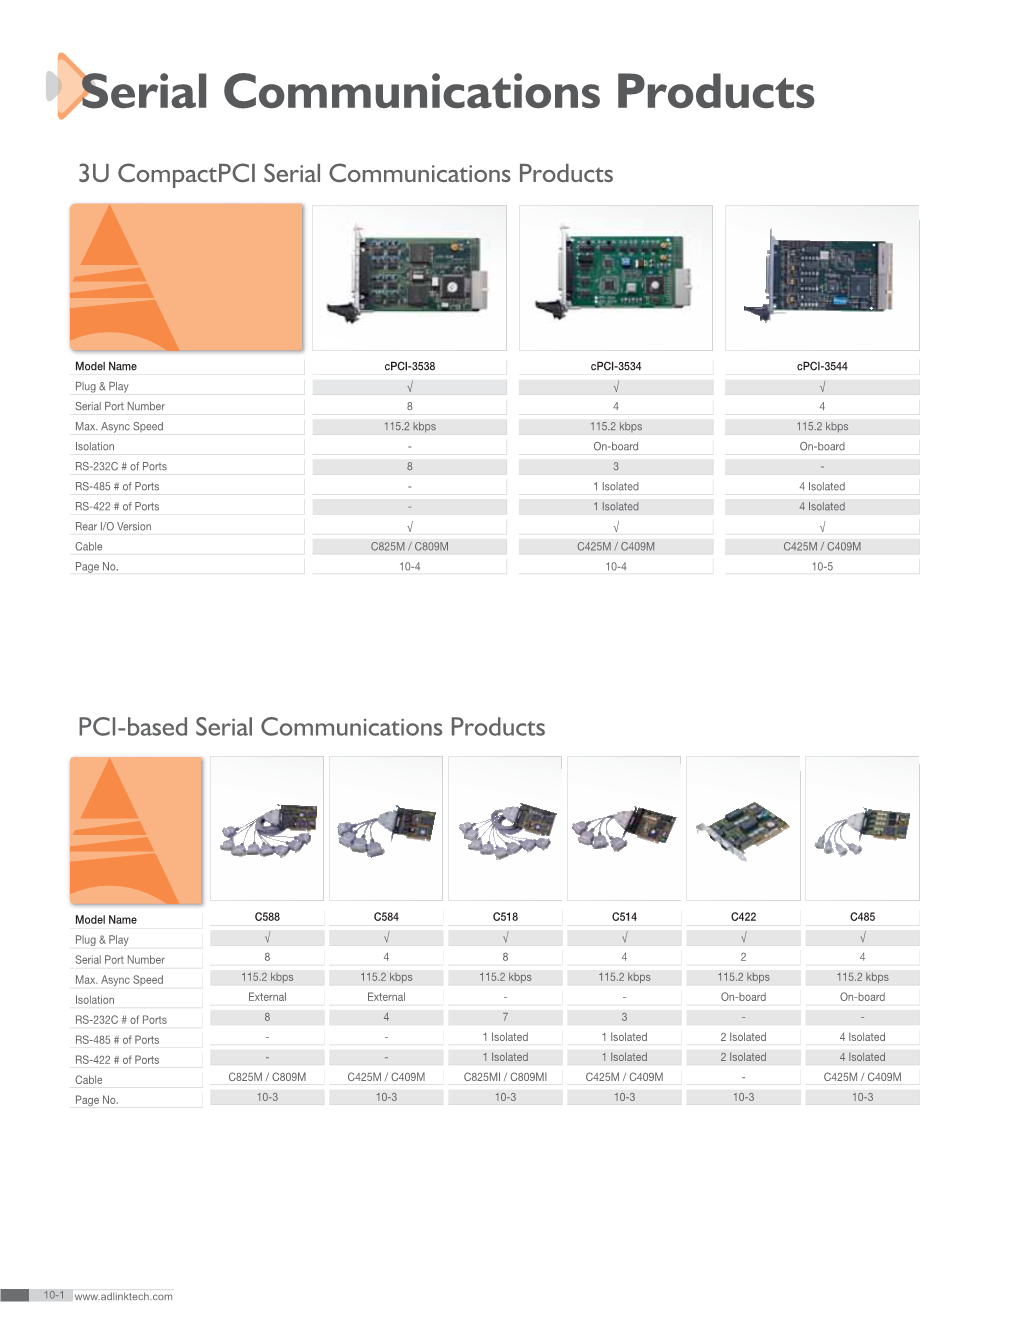 Serial Communications Products